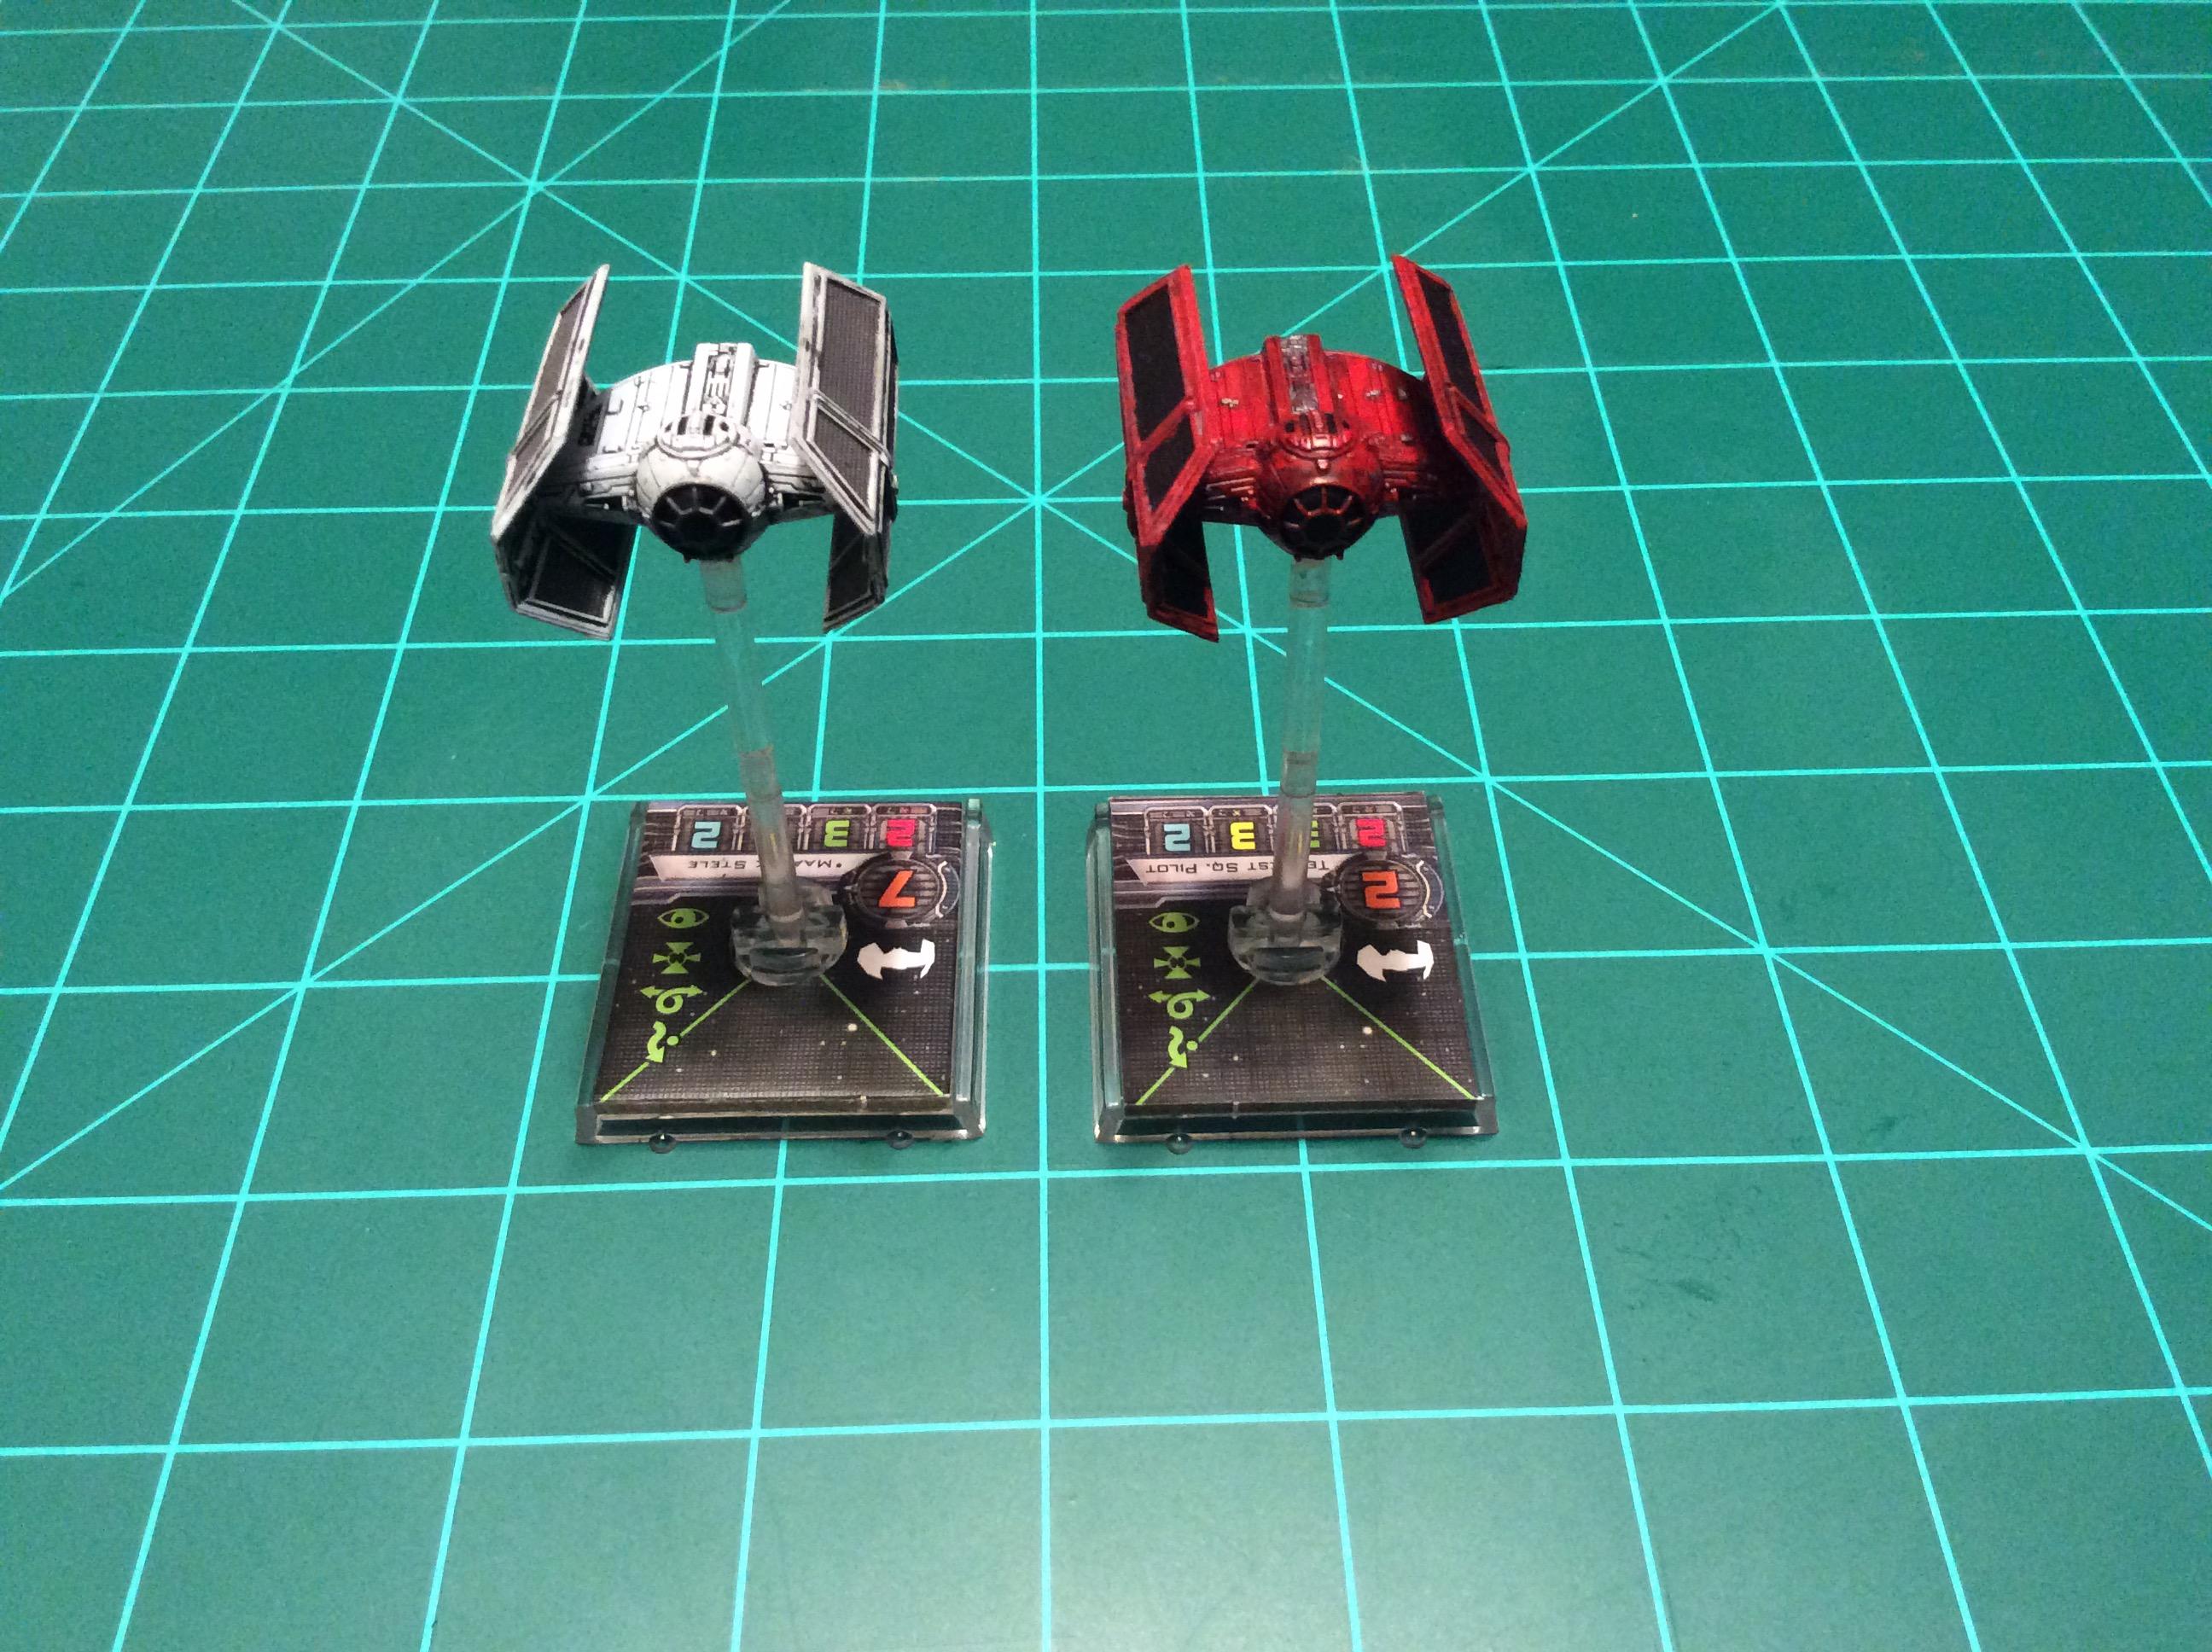 1/270 Scale, Advanced, Defender, E-wing, Interceptor, Scum And Villainy, Star Wars, Tie Fighter, X-wing Miniatures Game